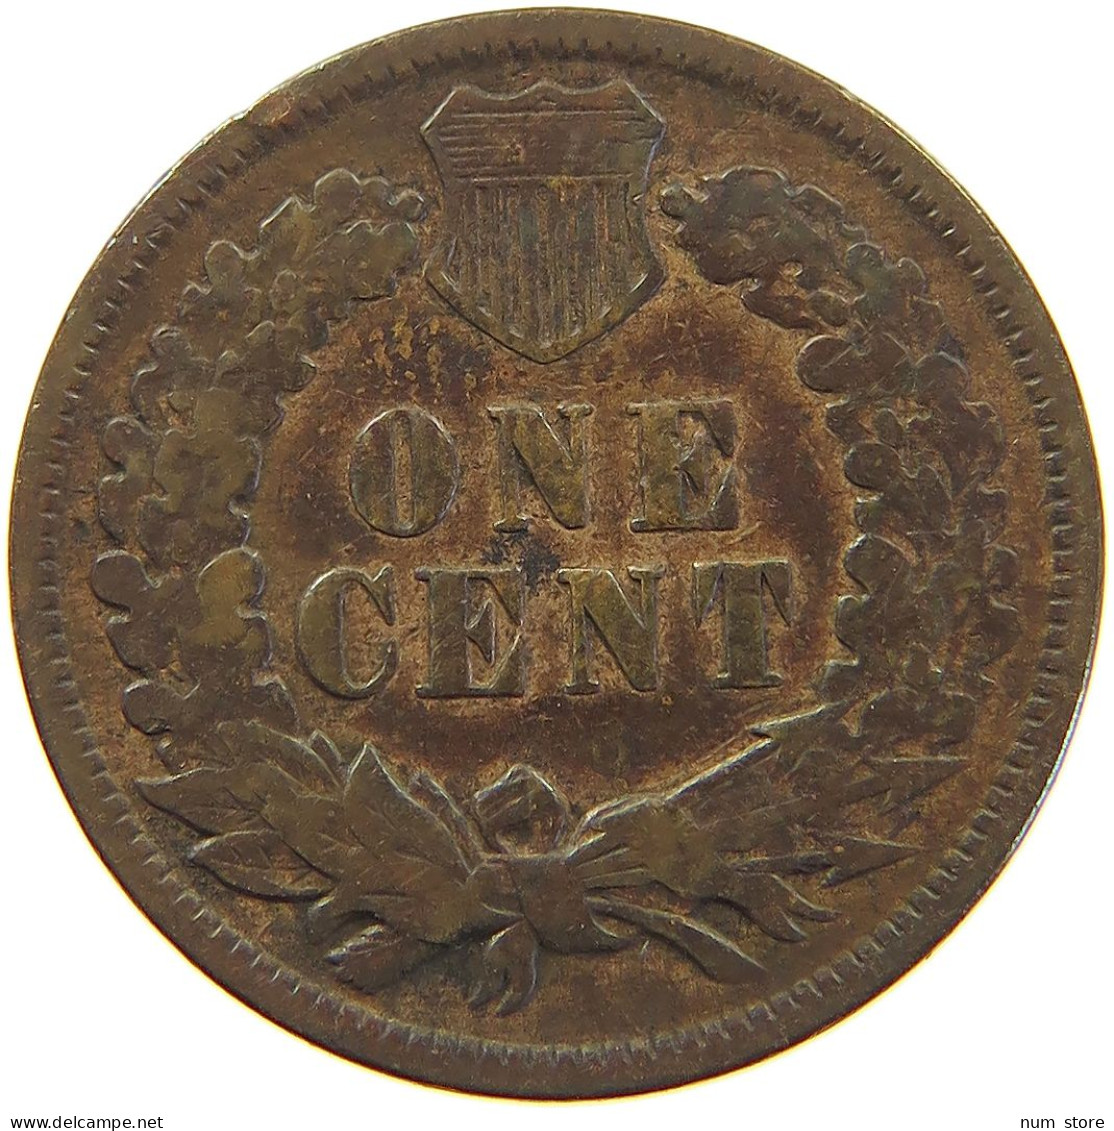 UNITED STATES OF AMERICA CENT 1890 INDIAN HEAD #c063 0227 - 1859-1909: Indian Head